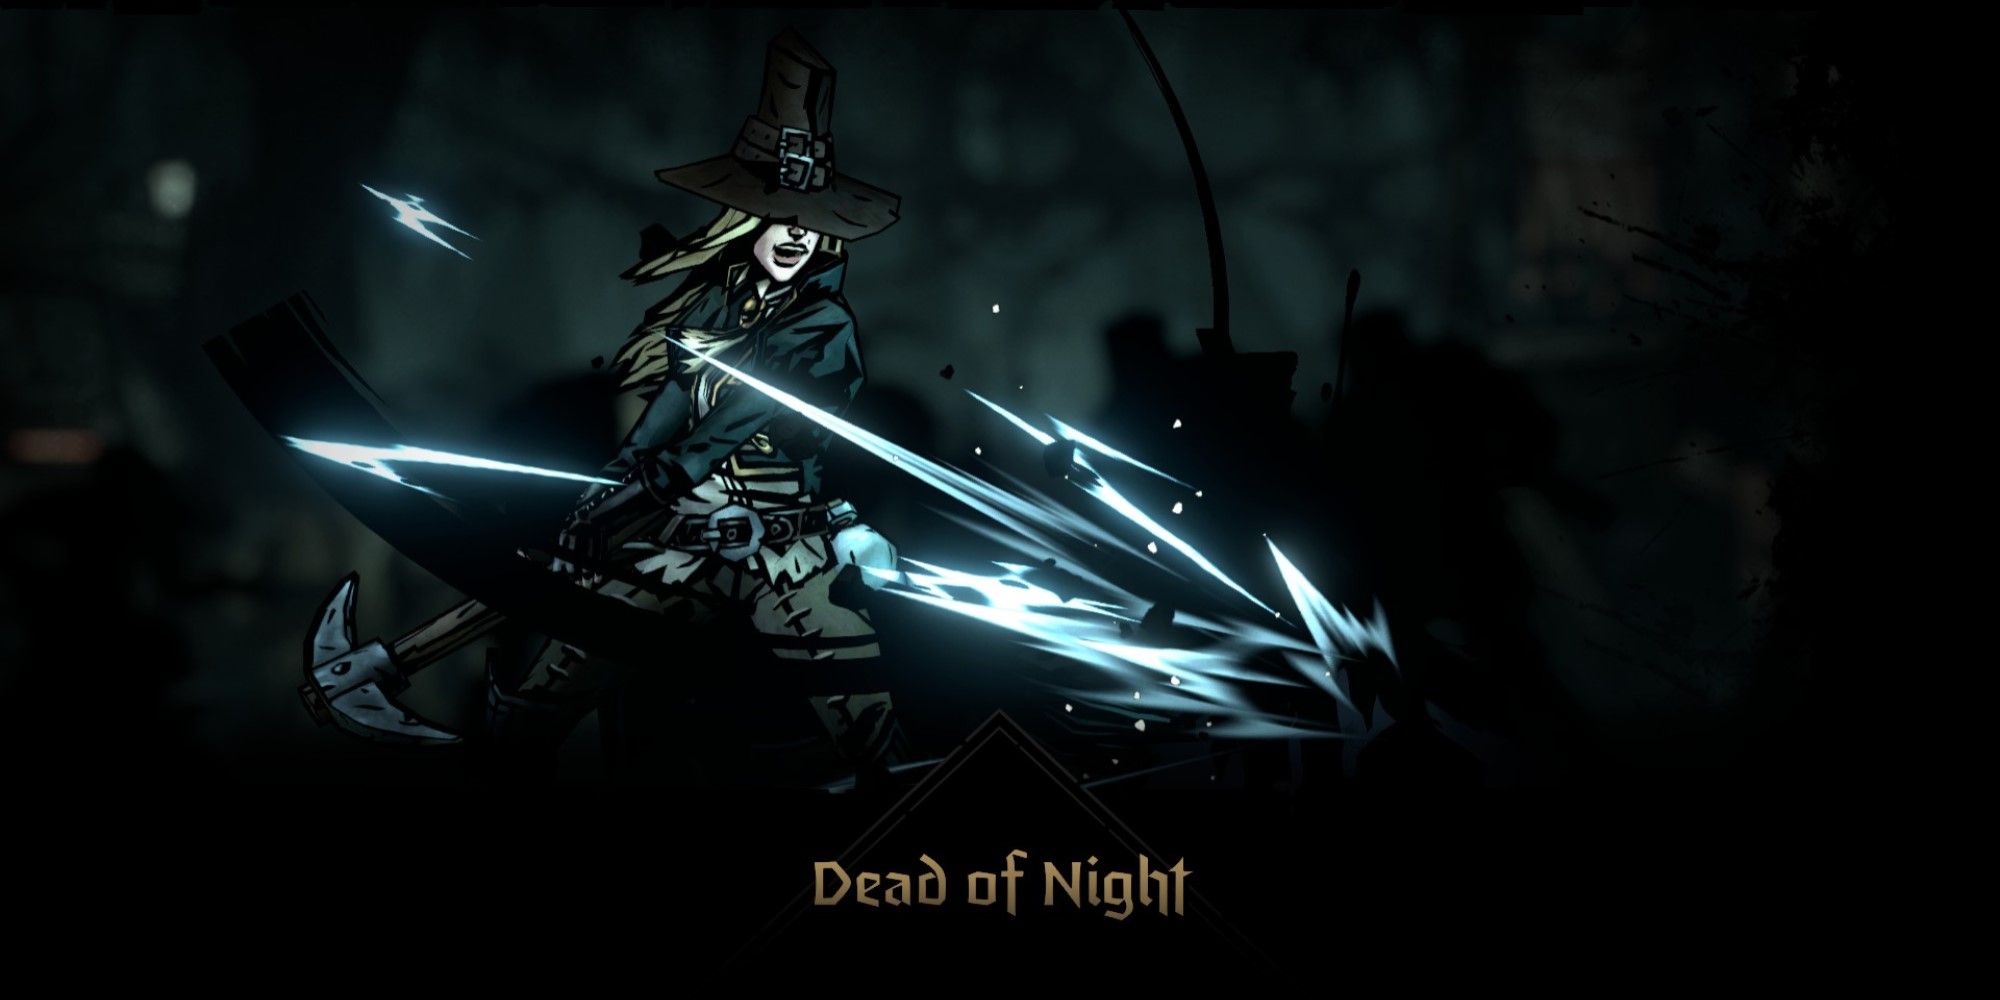 A screenshot of the Dead of Night Skill being used in Darkest Dungeon 2